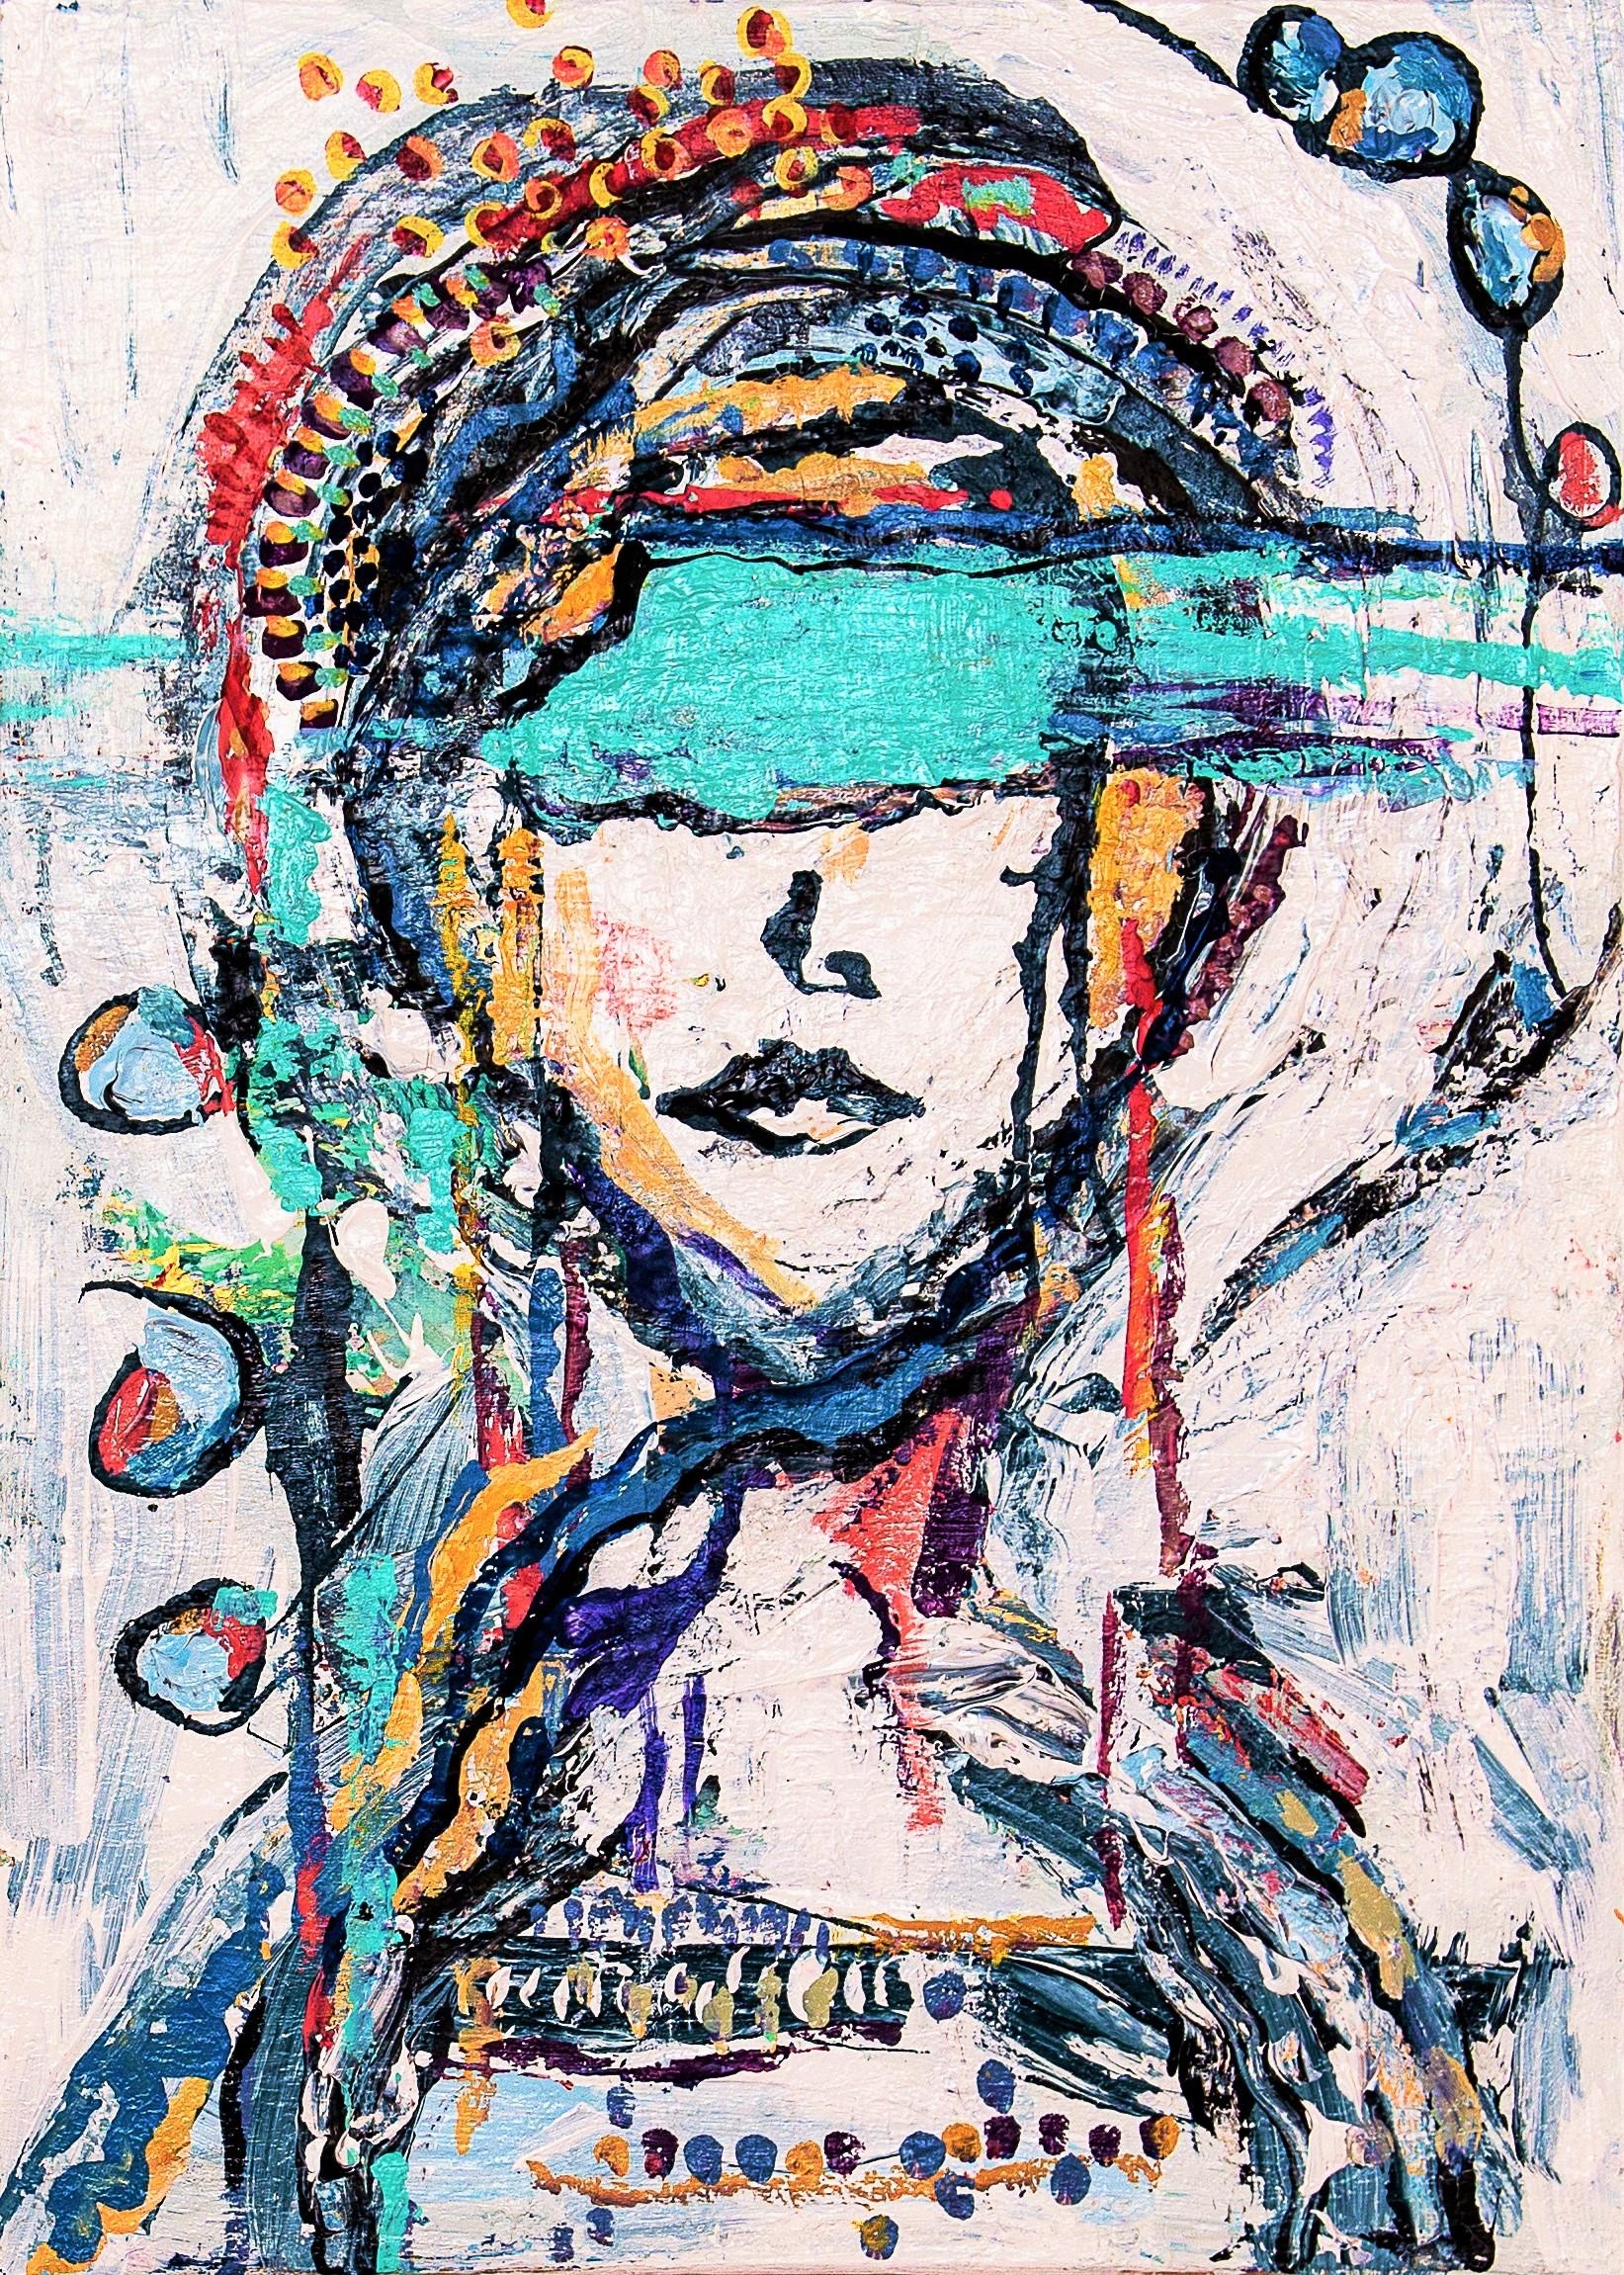 "She. Queen of the tribe."
A wonderful artwork, abstract and exotic.
Artist: Fiona Mares
#fionamaresegypt #kunst #art 